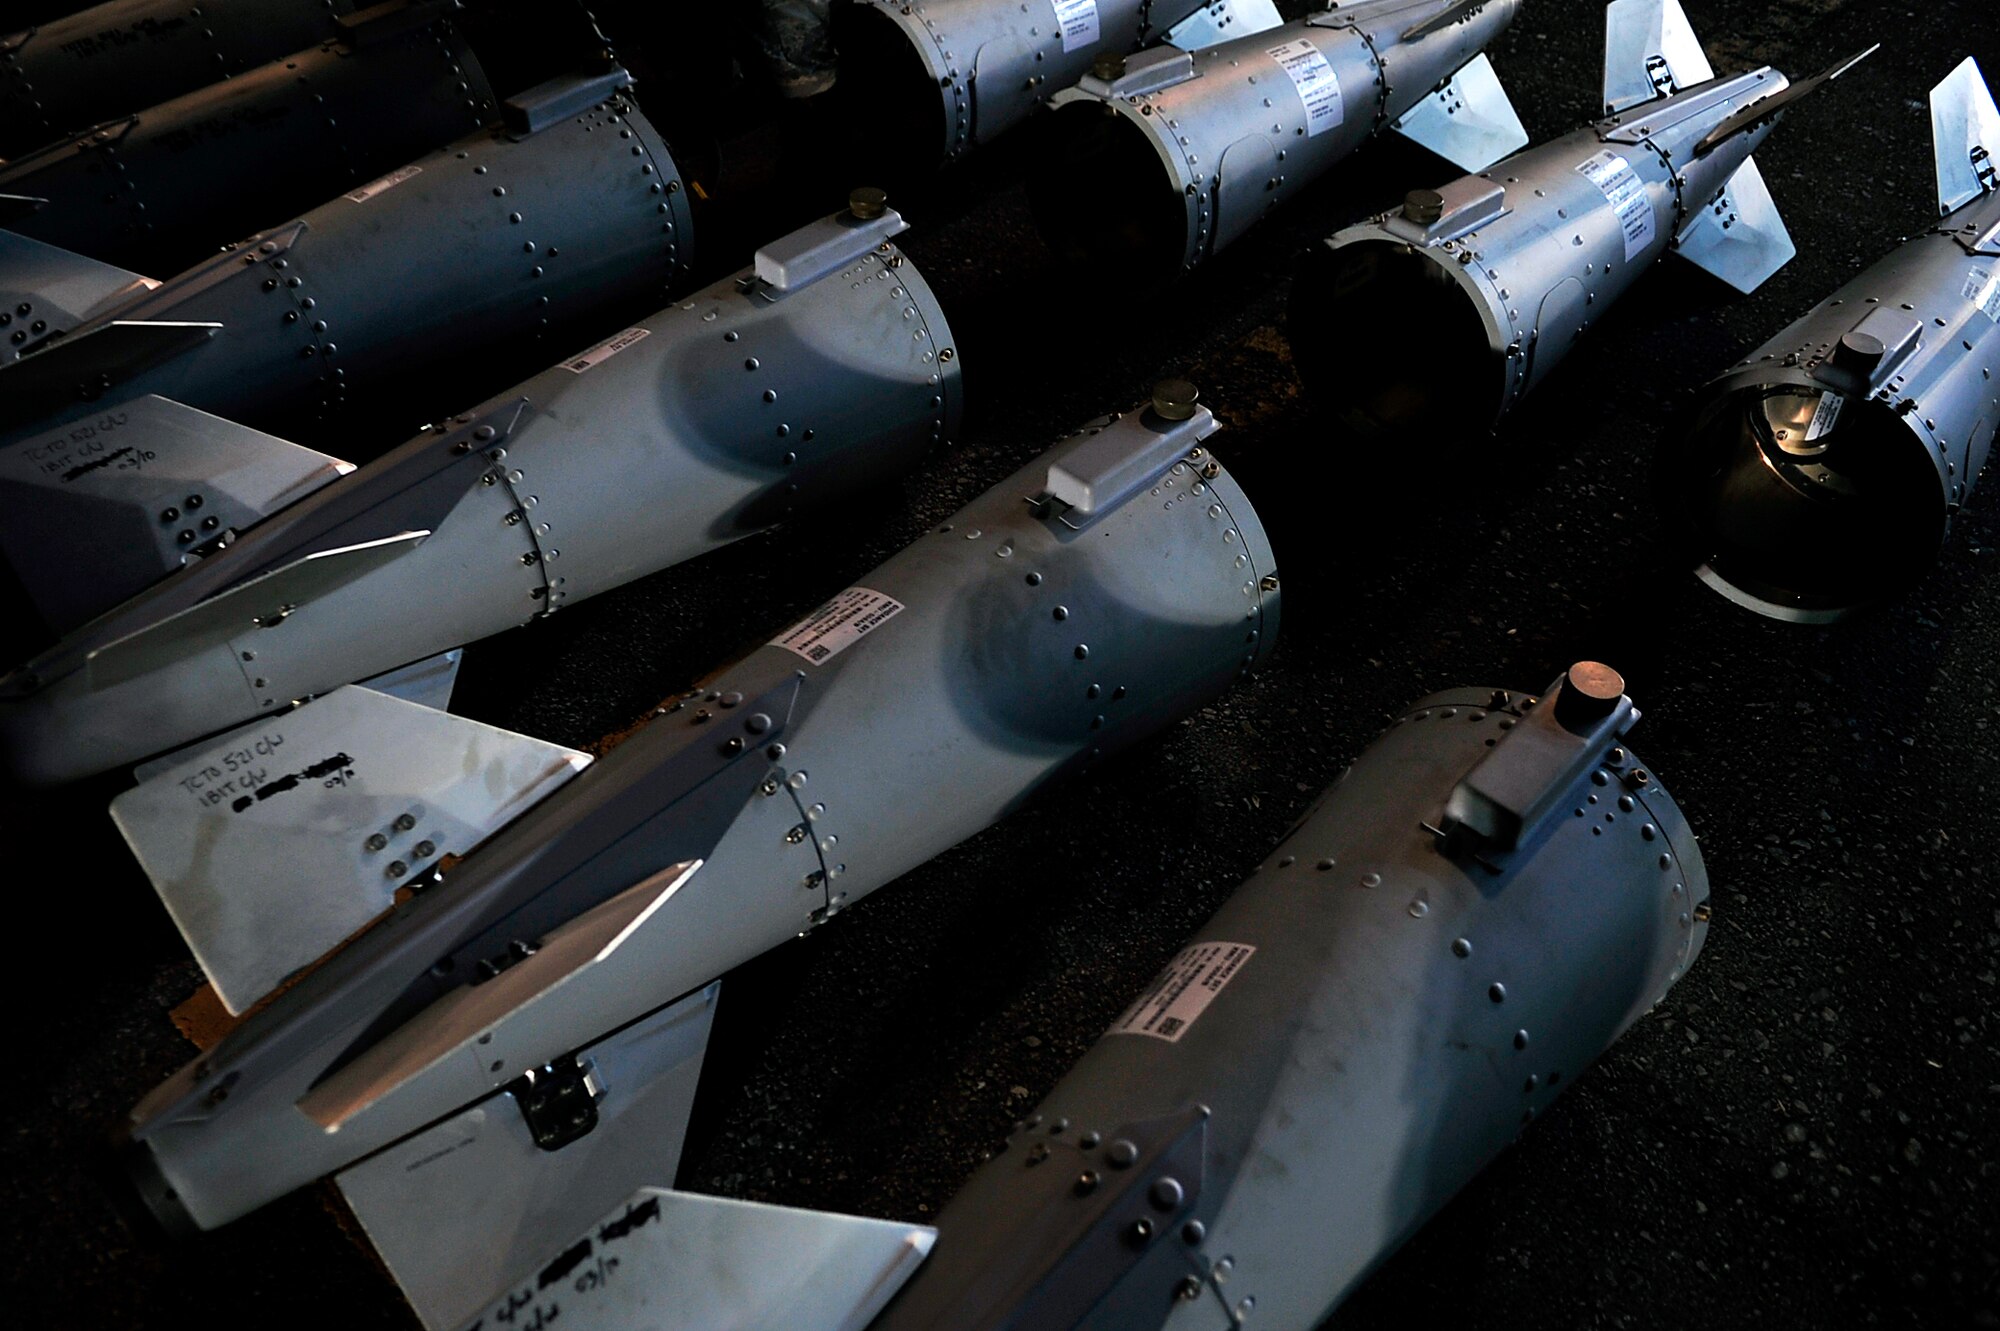 Airmen from the 18th Munitions Squadron attach the tail-ends of Mark 83 bomb bodies during Beverly High 10-02 at Kadena Air Base, Japan, March 24. The 18th Wing is participating in a Local Operational Readiness Exercise March 22-26 to test the readiness of Kadena Airmen. (U.S. Air Force photo/Senior Airman Amanda Grabiec)   